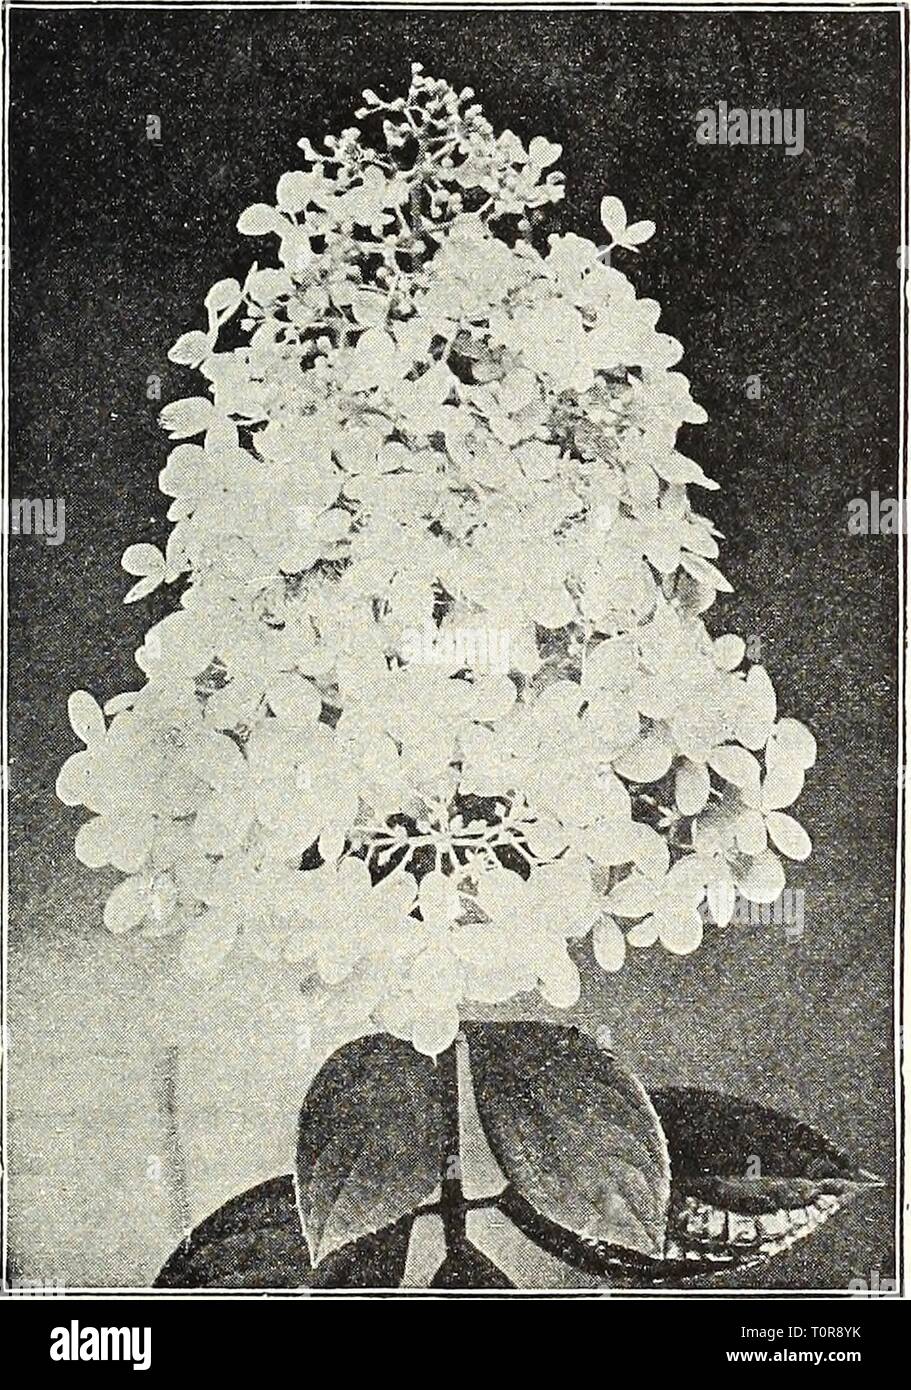 Dreer's autumn catalogue 1922 (1922) Dreer's autumn catalogue 1922  dreersautumncata1922henr Year: 1922  Deutzia Crfnata Magnifica    A tall Shrub of willowy covered with golden yel- Hyukangea Paniculata Gkandiflora Evonymus Europaea (BKruiug Bush). A very conspicuous, tall Shrub, which In the autumn and winter is loaded with scarlet seed pods, from which orange-colored berries hang on slender threads. 60 cts. each. Exochorda Grandiflora {Pearl Bush). A medium-sized Shrub, bearing whl.e flowers in slender racemes in early spring; very graceful; useful for cut flowers. 75 cts. each. Forsythia F Stock Photo